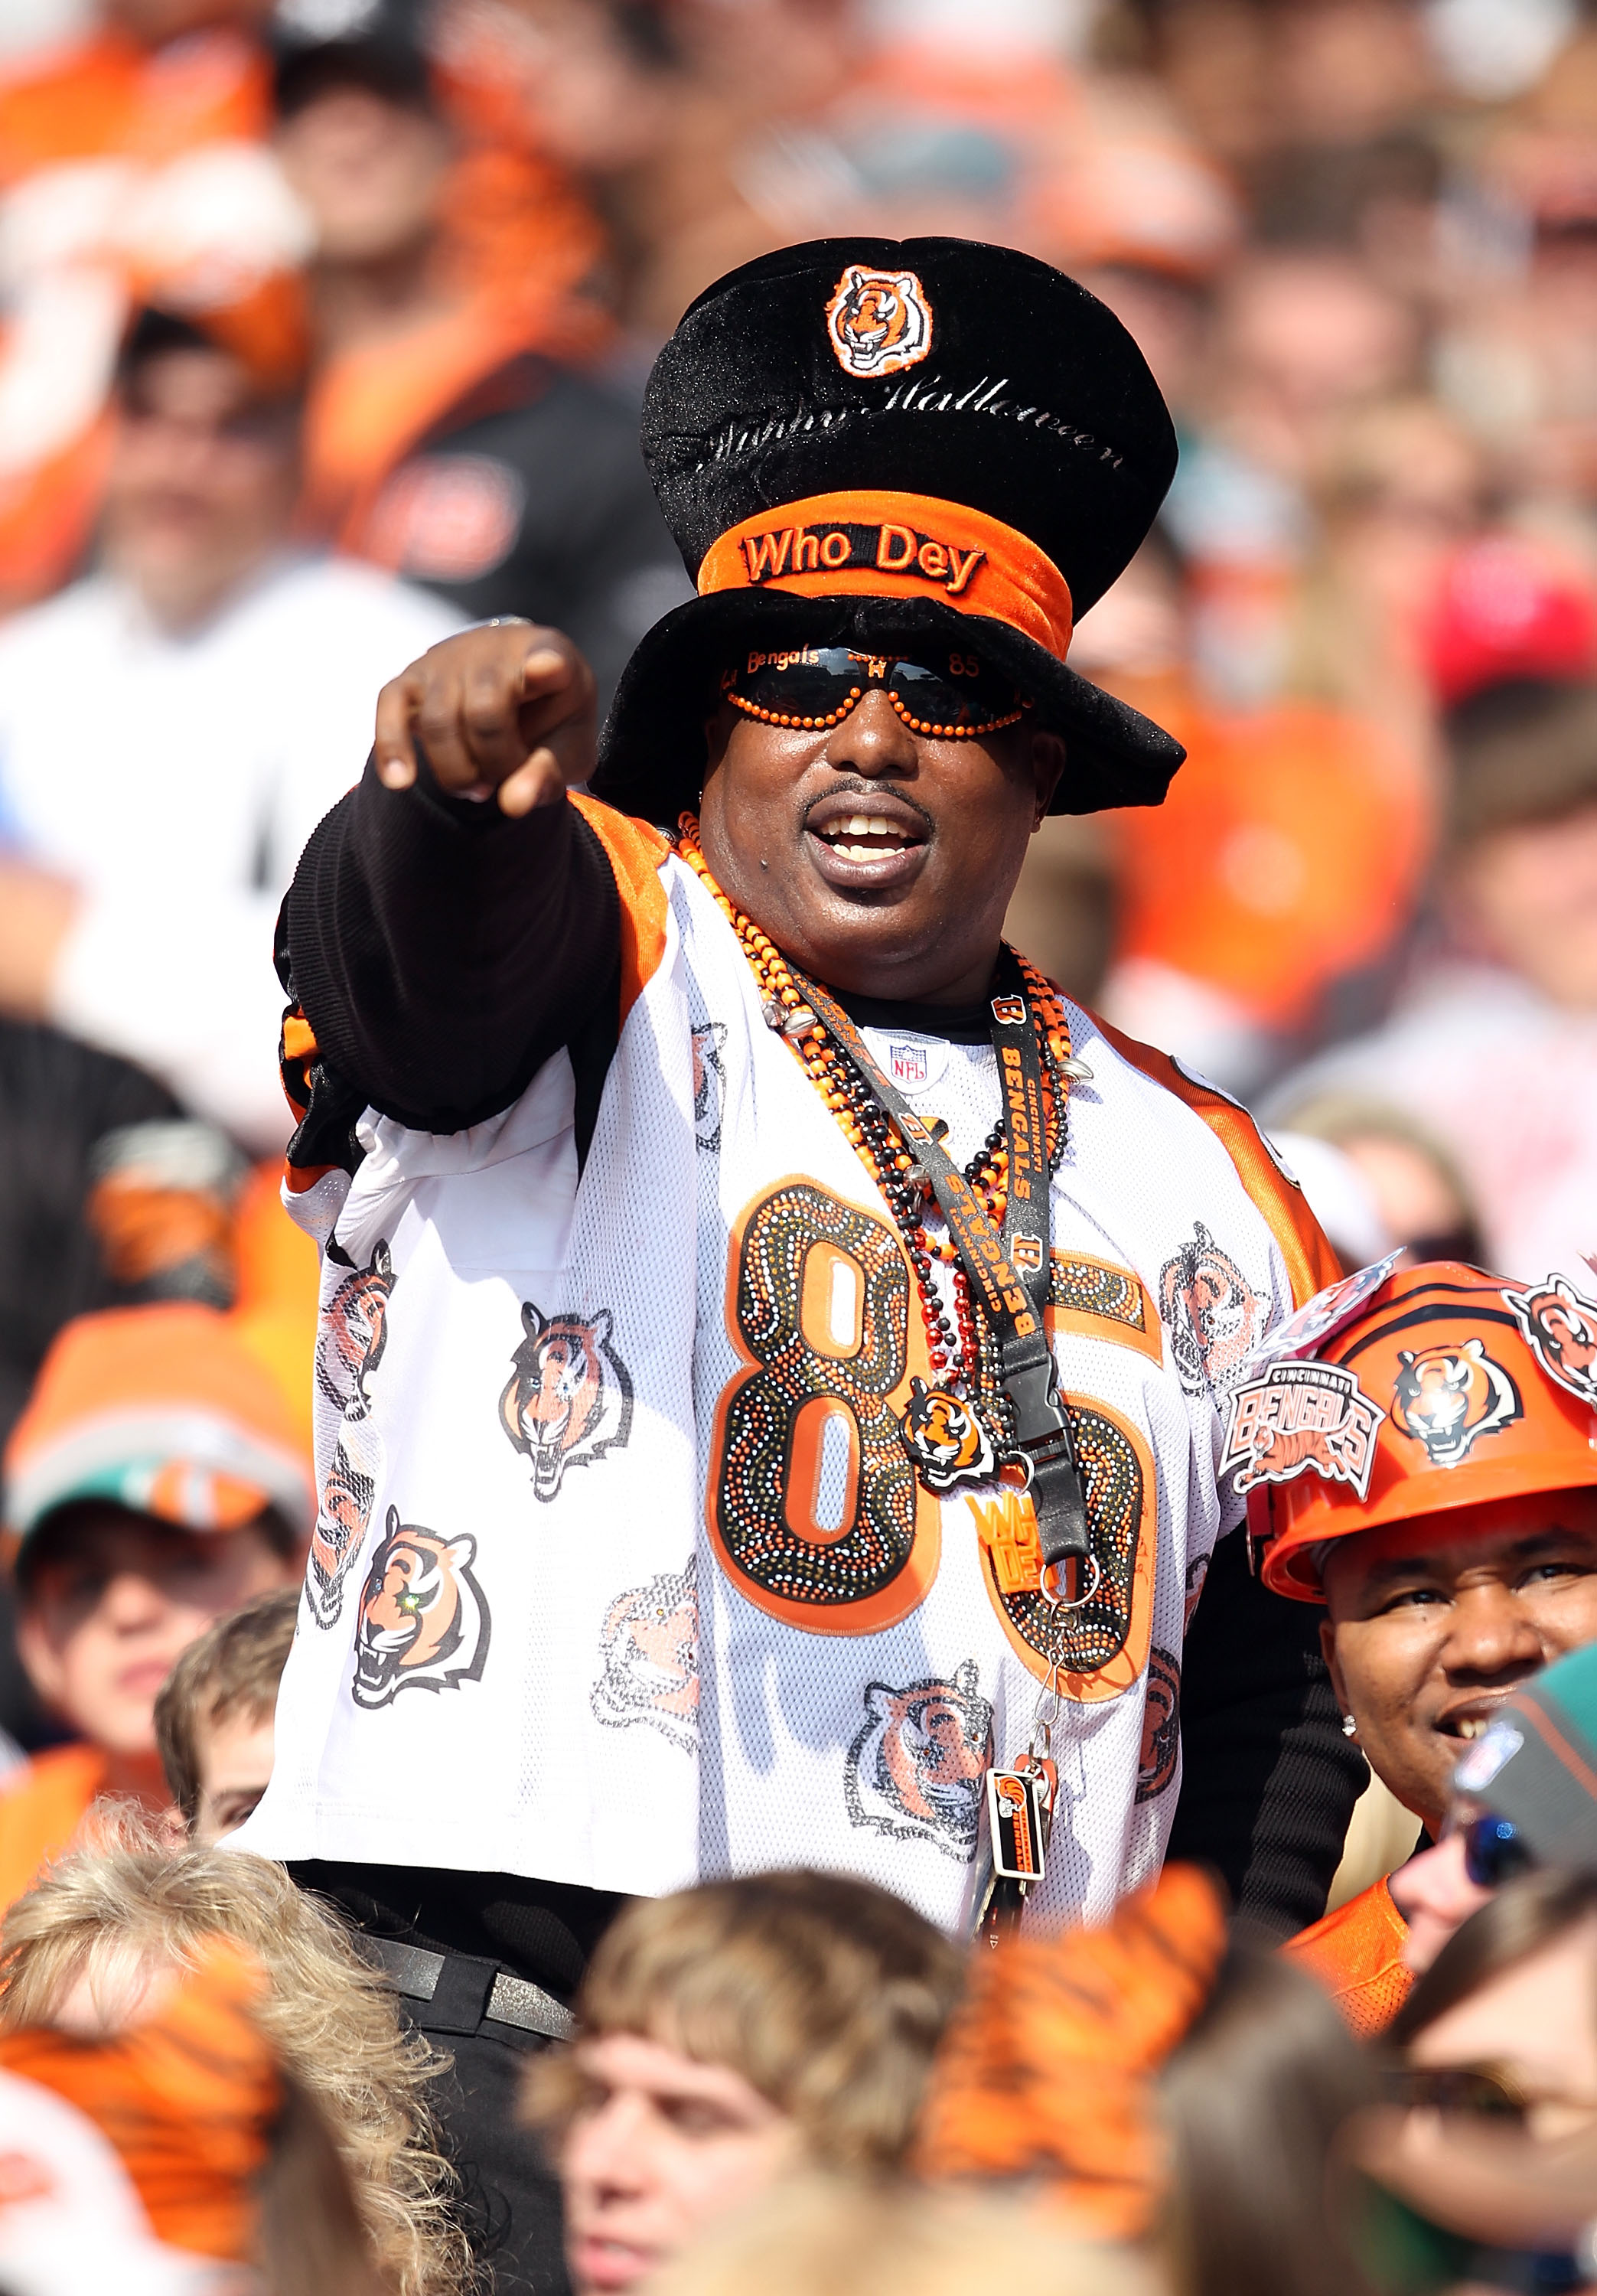 CINCINNATI - OCTOBER 31:  A Cincinnati Bengals fan is dressed for halloween during the NFL game against the Miami Dolphins at Paul Brown Stadium on October 31, 2010 in Cincinnati, Ohio.  (Photo by Andy Lyons/Getty Images)